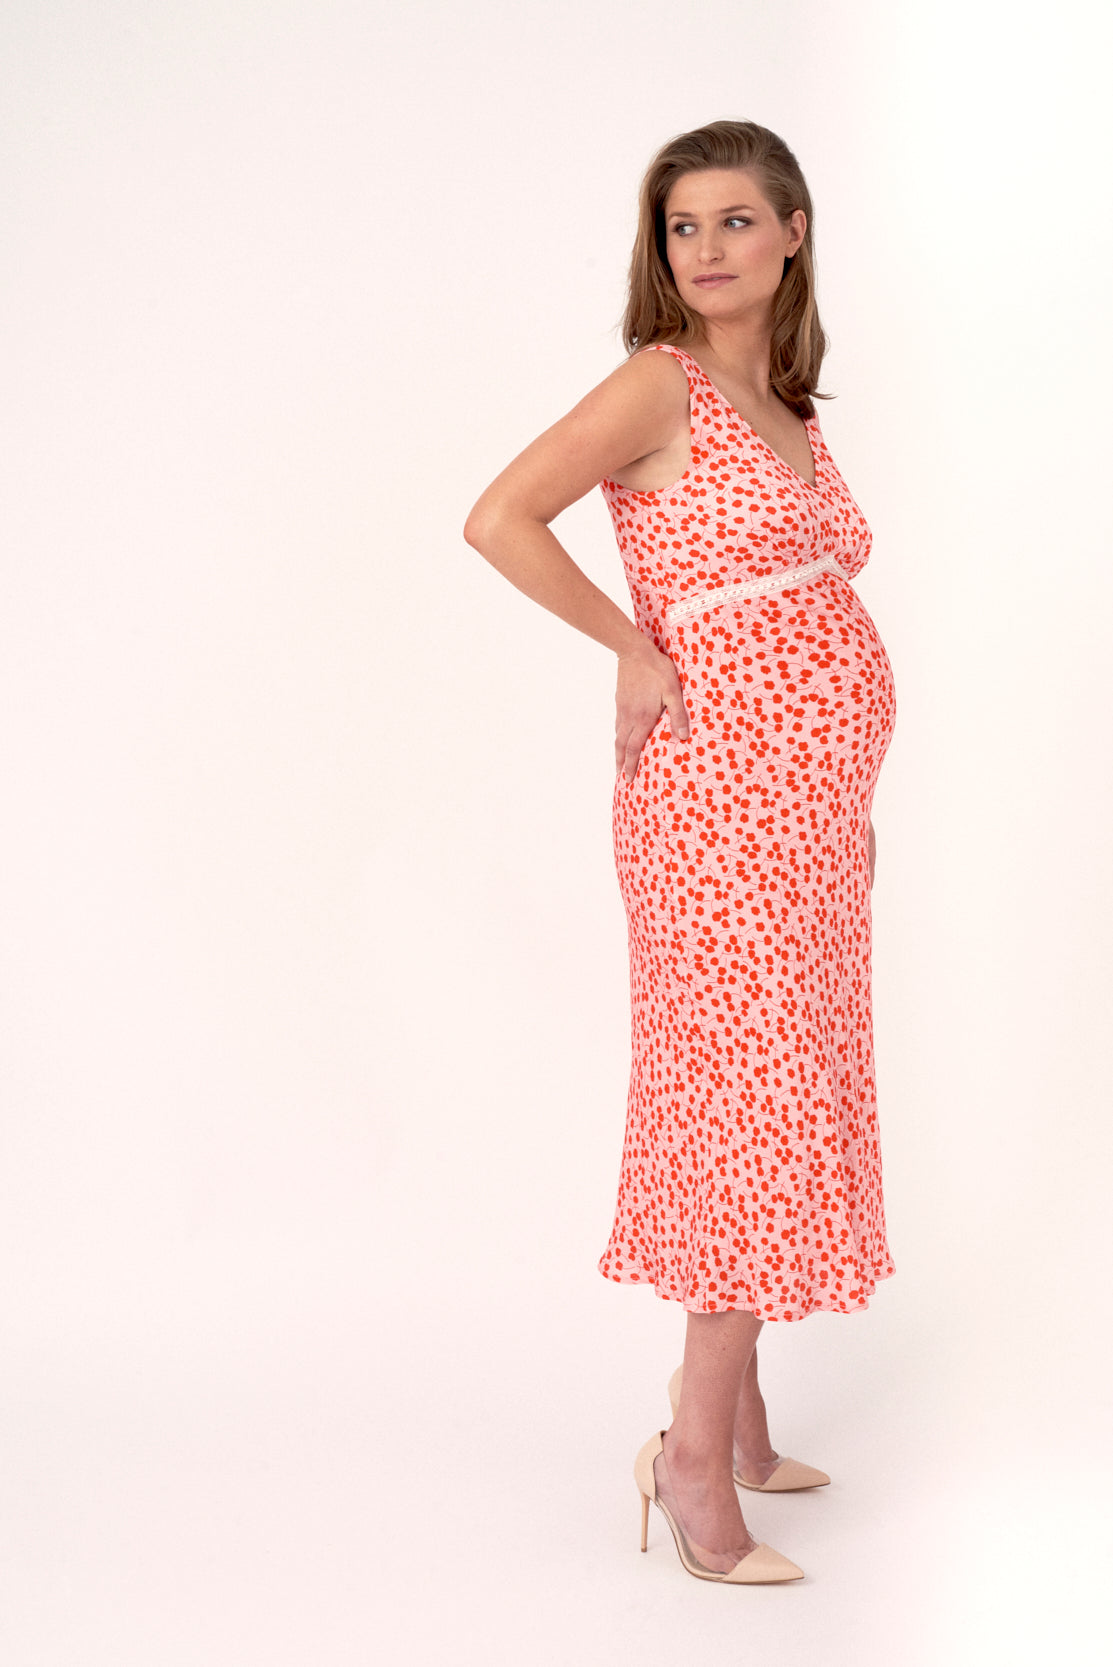 Pretty in pink in this beautiful pink and red sateen maternity dress. Elegant and luxe, this is the perfect elevated maternity occasion dress for weddings, parties and evening events. Designed to accommodate a 9-month bump but it is also very flattering dress for post pregnancy as it drapes the body.